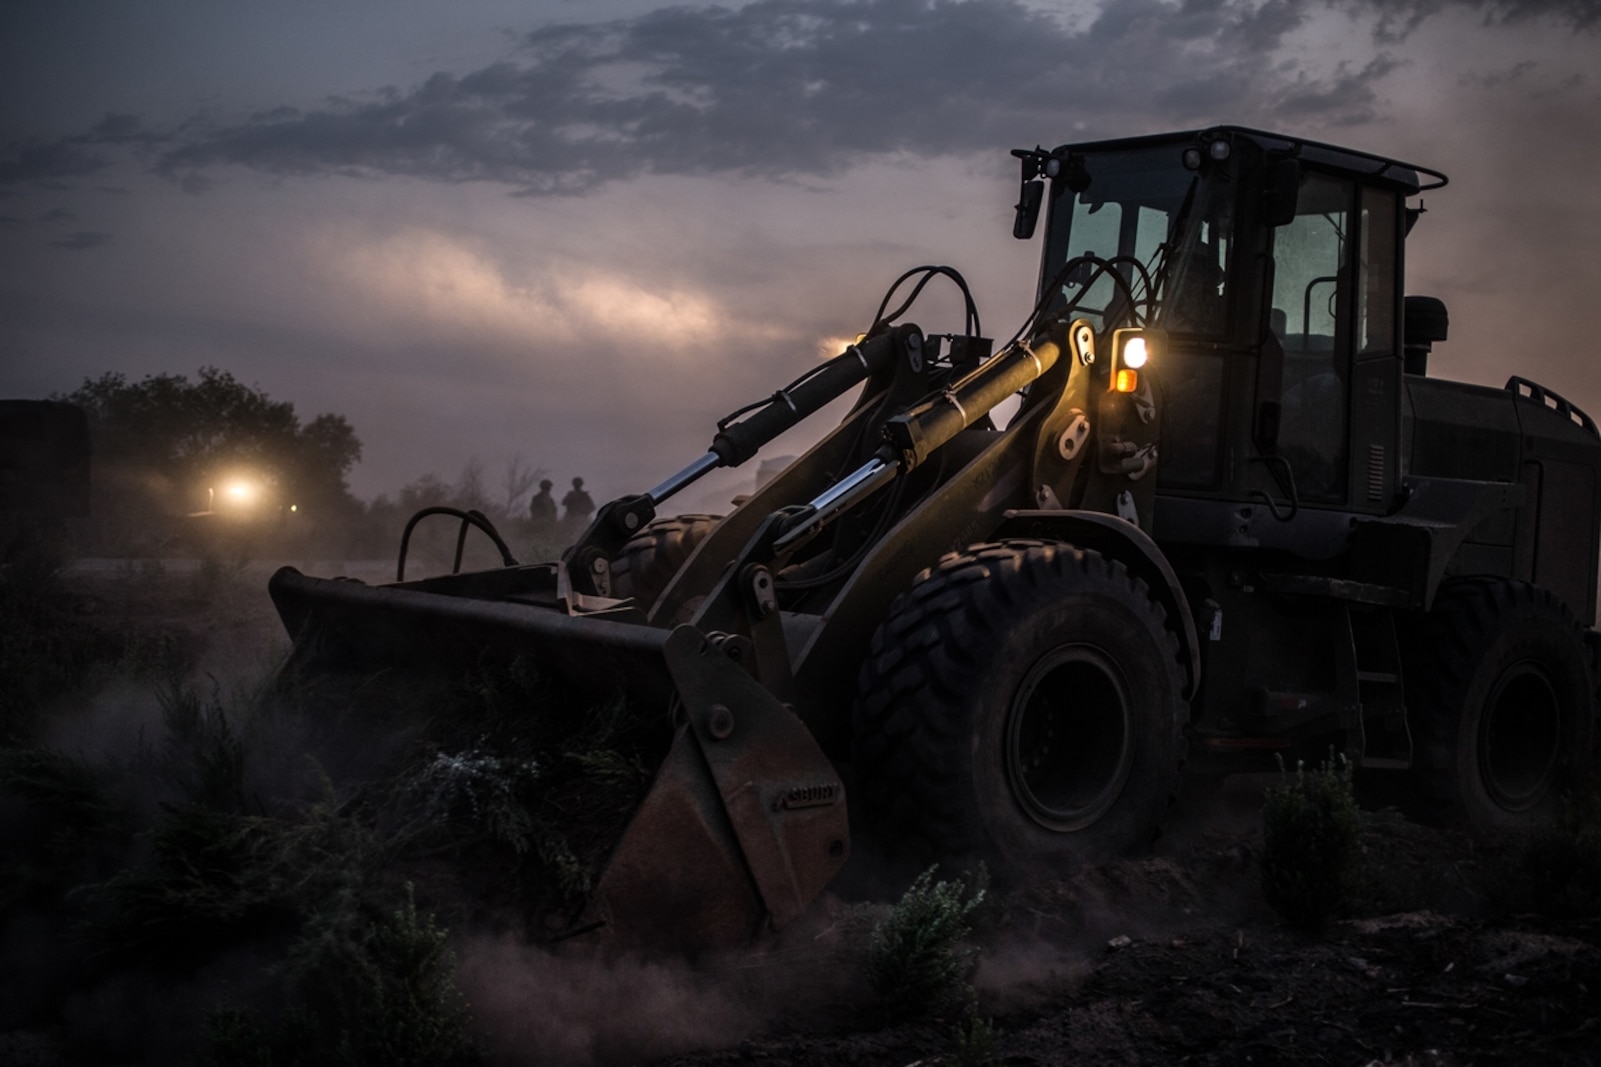 U.S. Marine Cpl. Angelica Mcfarlin, a heavy equipment operator with Support Company, 7th Engineer Support Battalion, 1st Marine Logistics Group, moves shrubbery during Exercise Deep Strike II at Blythe, Calif., Sept. 6, 2017. Tractor Rubber Articulated Multi-terrain vehicles are used to move heavy equipment or clear debris while conducting field exercises. (U.S. Marine Corps photo by Lance Cpl. Timothy Shoemaker)